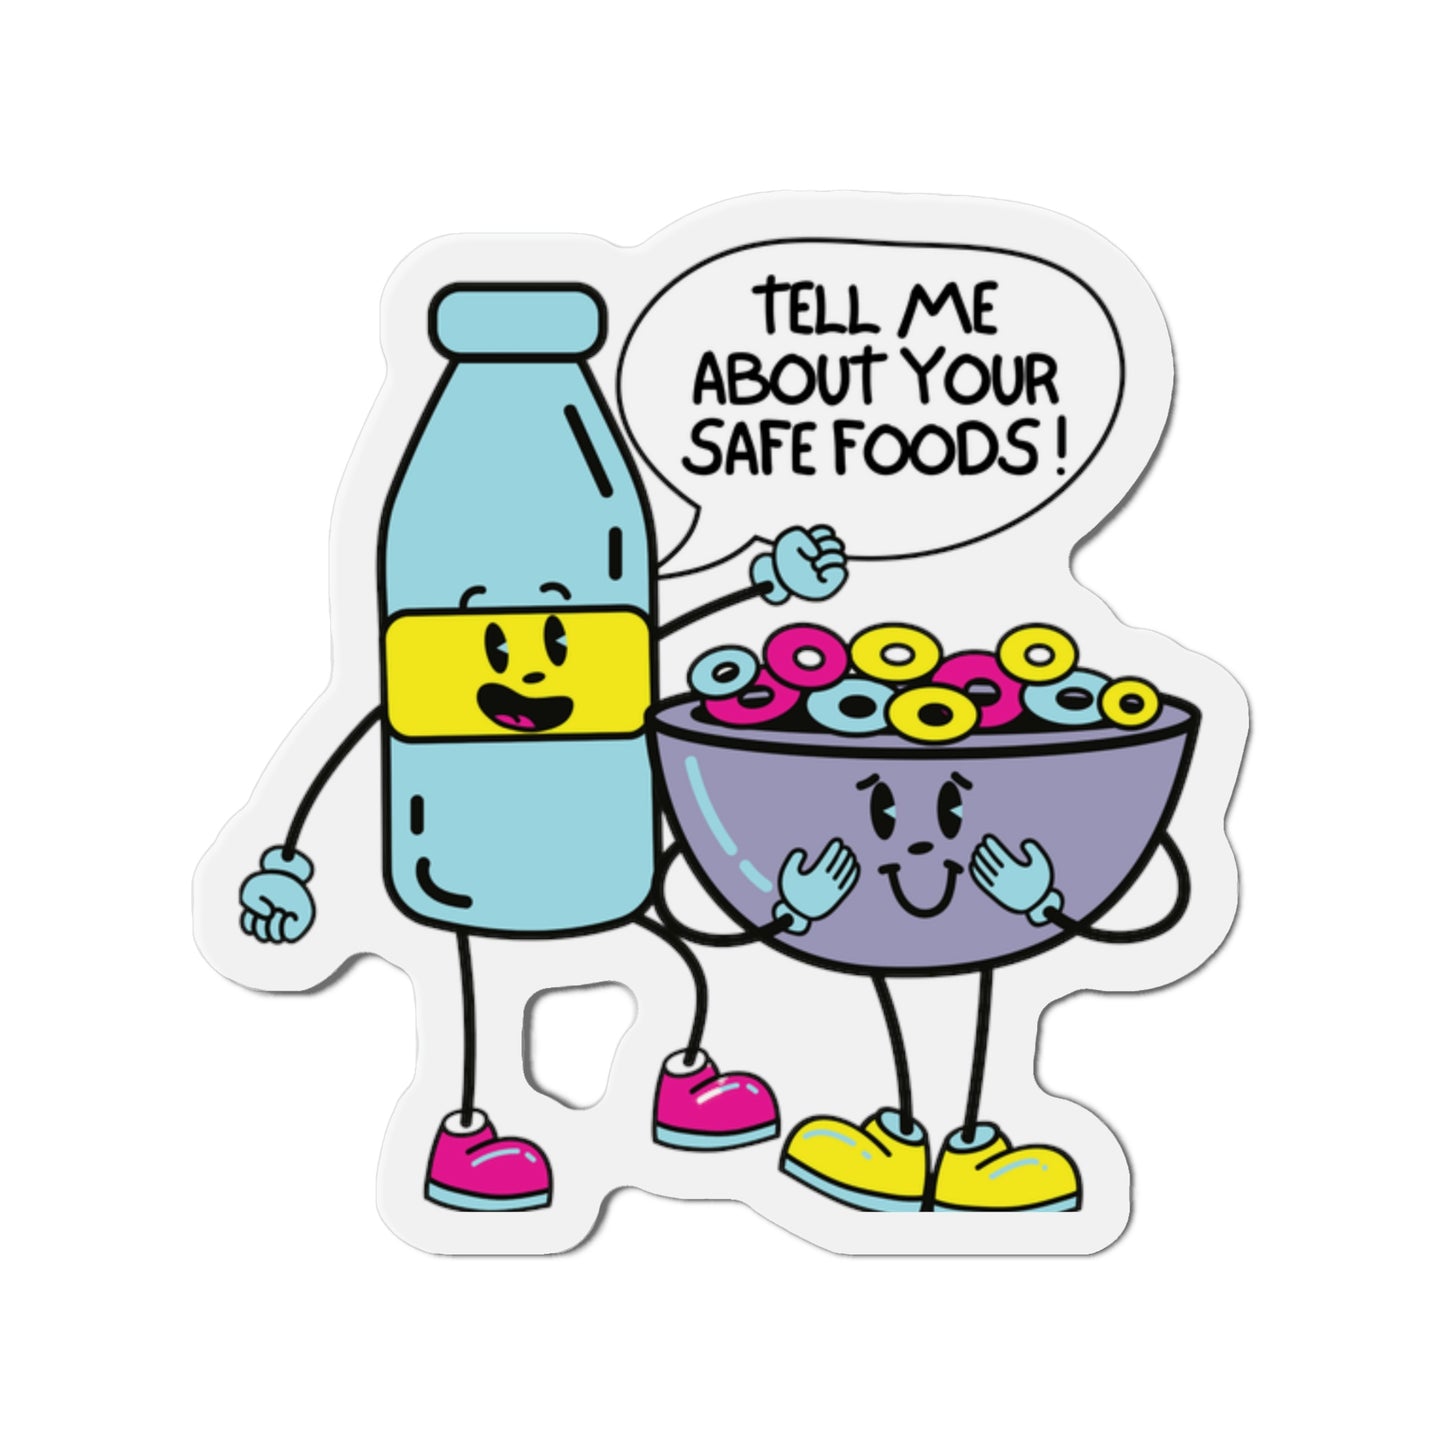 "Tell Me About Your Safe Foods!" Die-Cut Magnets